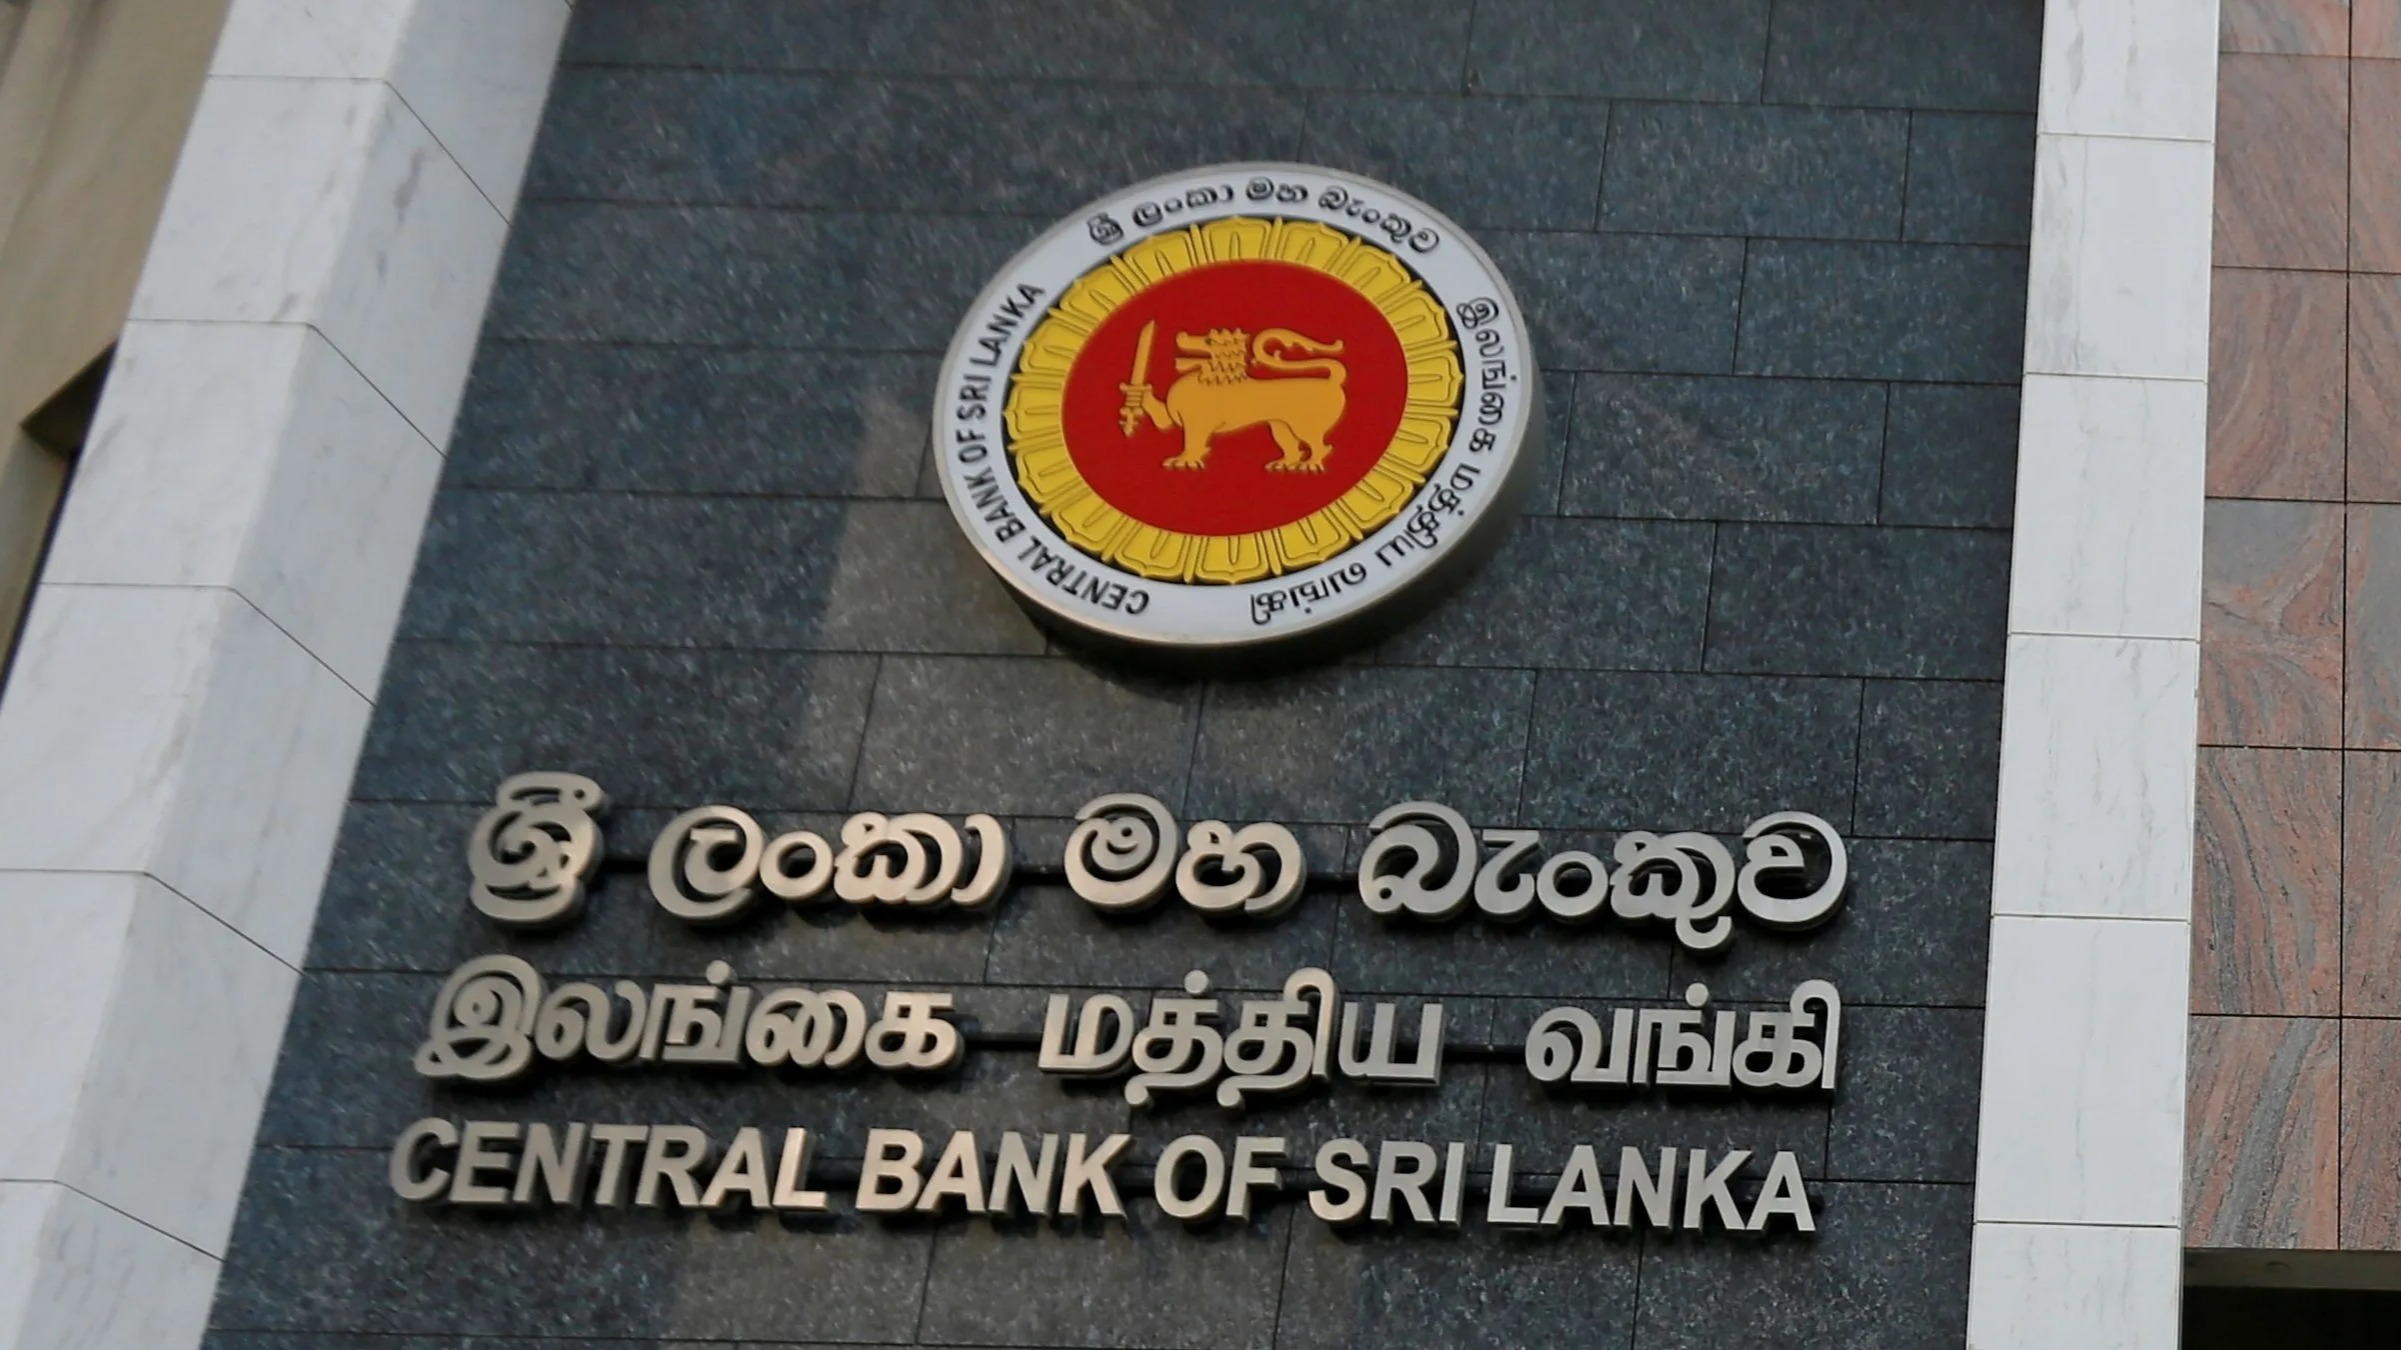 Банк шри ланки. Central Bank of Sri Lanka. Банки Шри Ланки. Central Bank of Sri Lanka app. Peoples Bank of Sri Lanka.